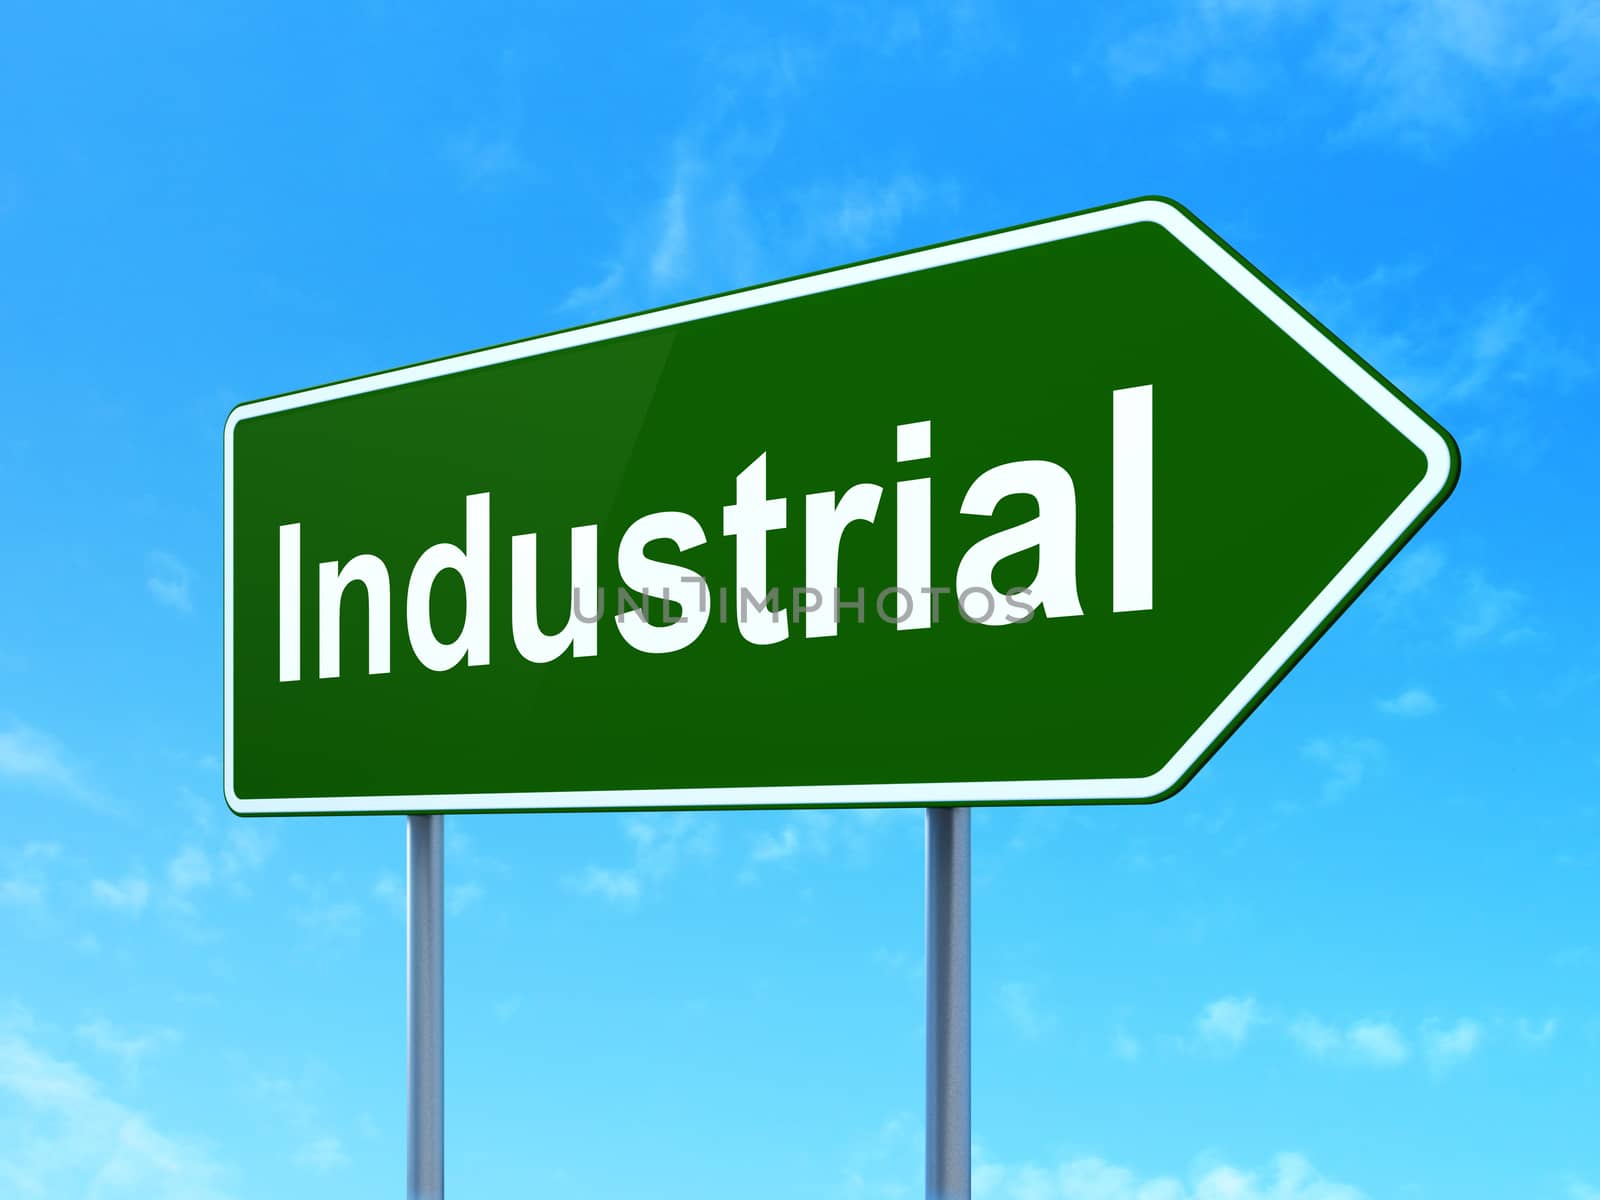 Manufacuring concept: Industrial on green road highway sign, clear blue sky background, 3D rendering